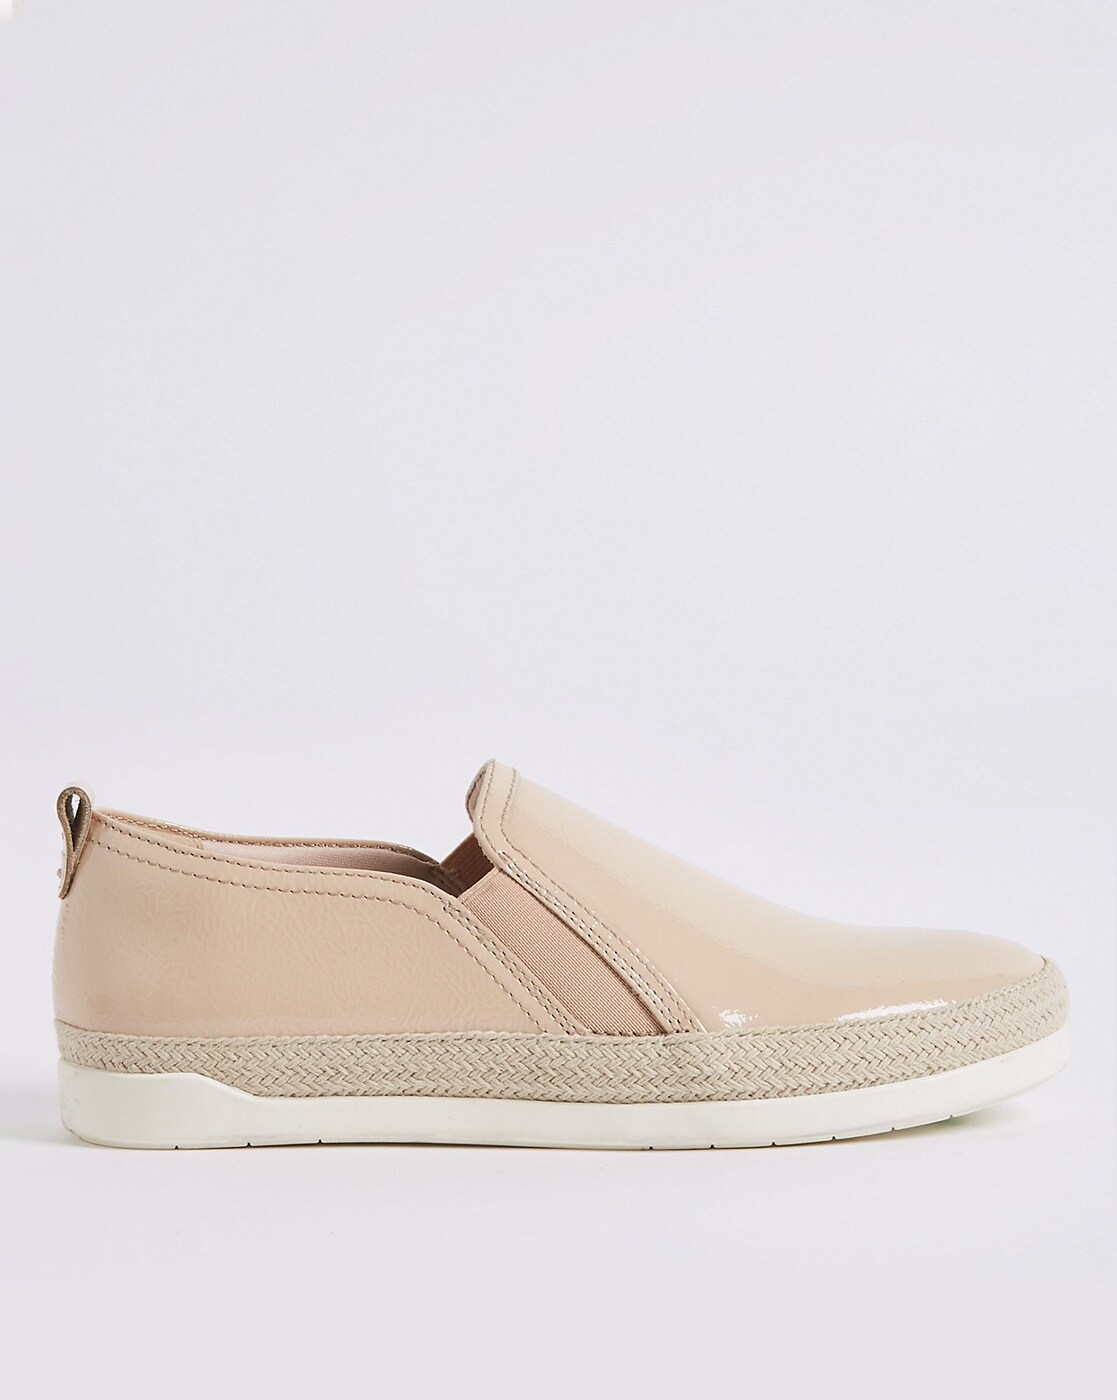 marks and spencer slip on shoes